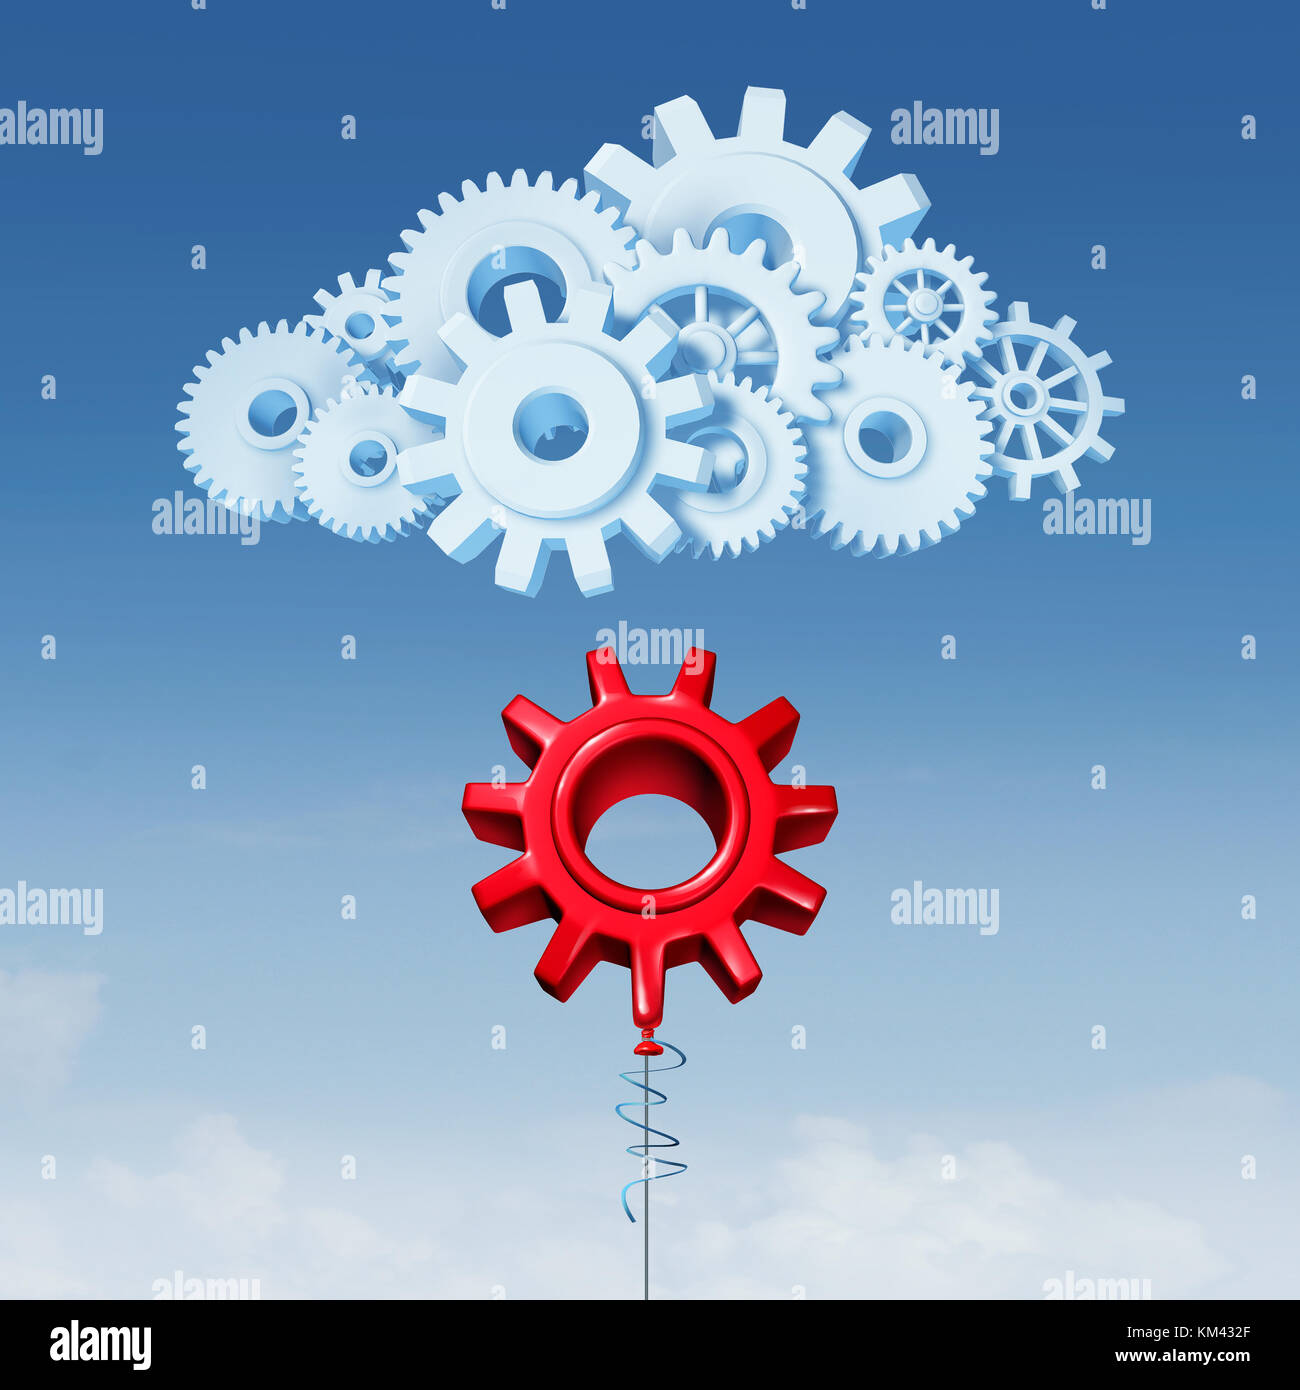 Join Cloud Computing data server services technology concept as a red balloon shaped as a gear joining a network  made of mechanical cogs. Stock Photo